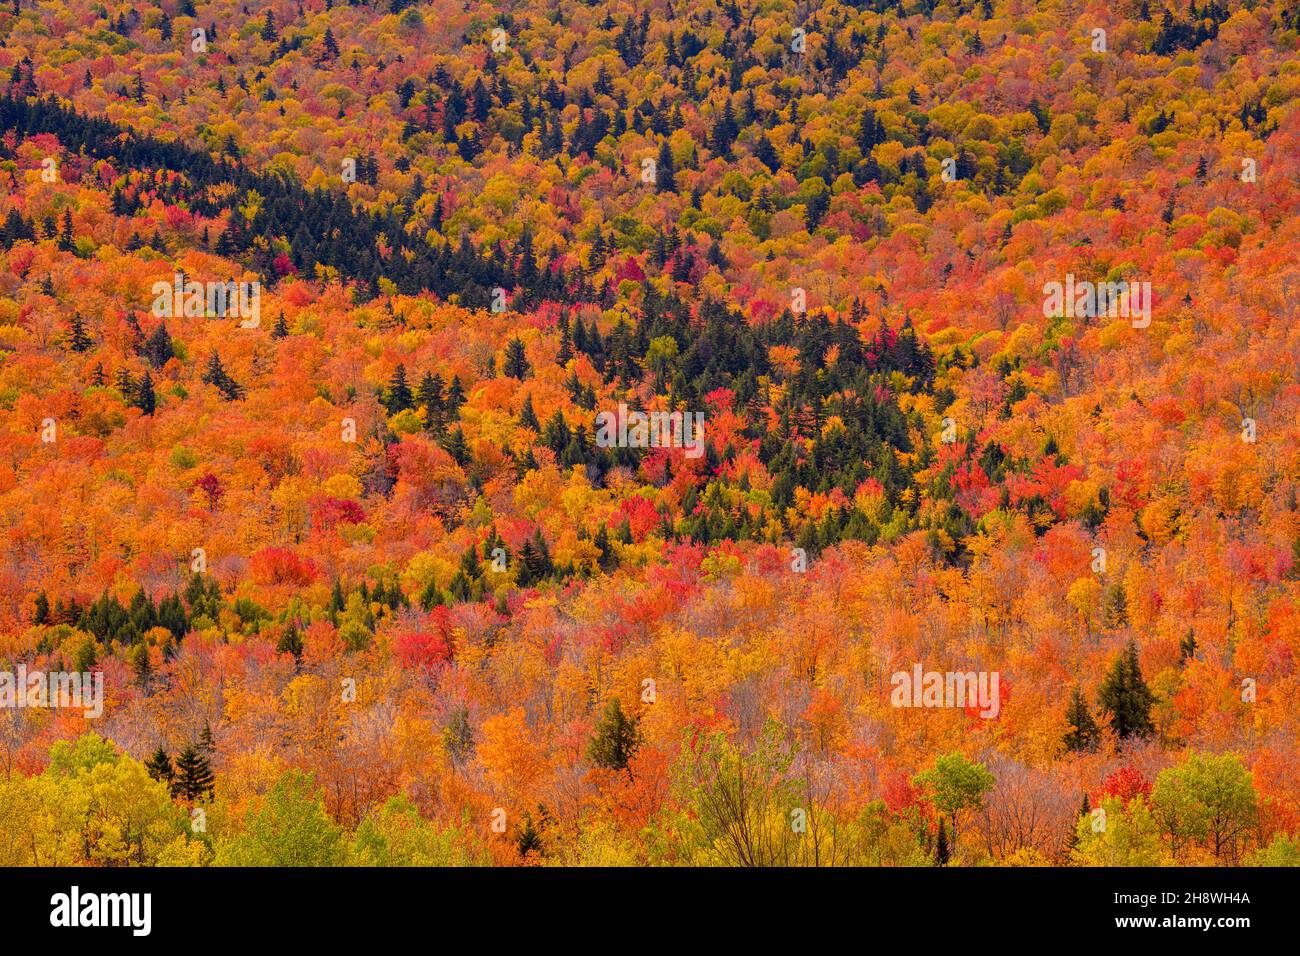 Autumn foliage in the deciduous forest on New England hillsides, Gorham, New Hampshire, USA Stock Photo